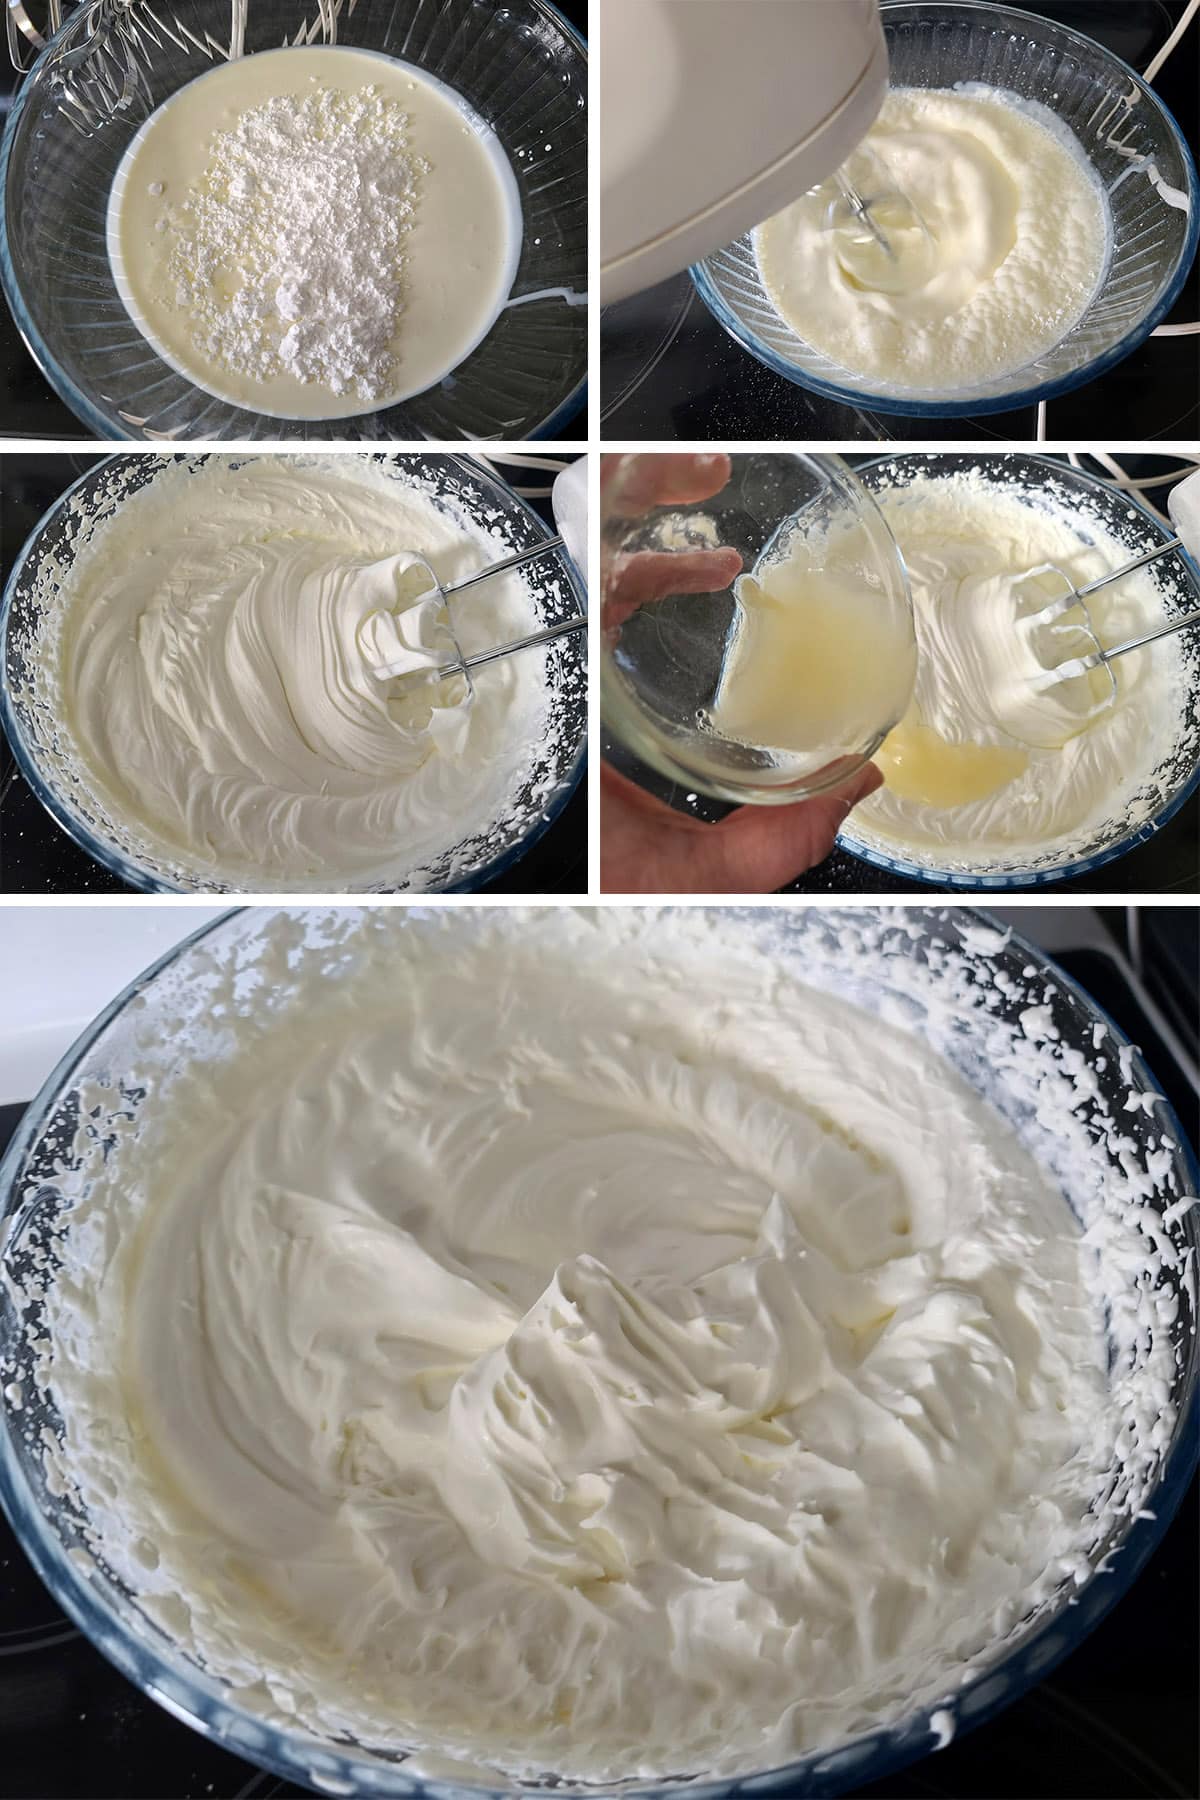 A 5 part image showing the topping ingredients being whisked, the melted gelatine mixture added, and the final whipped topping in a bowl.